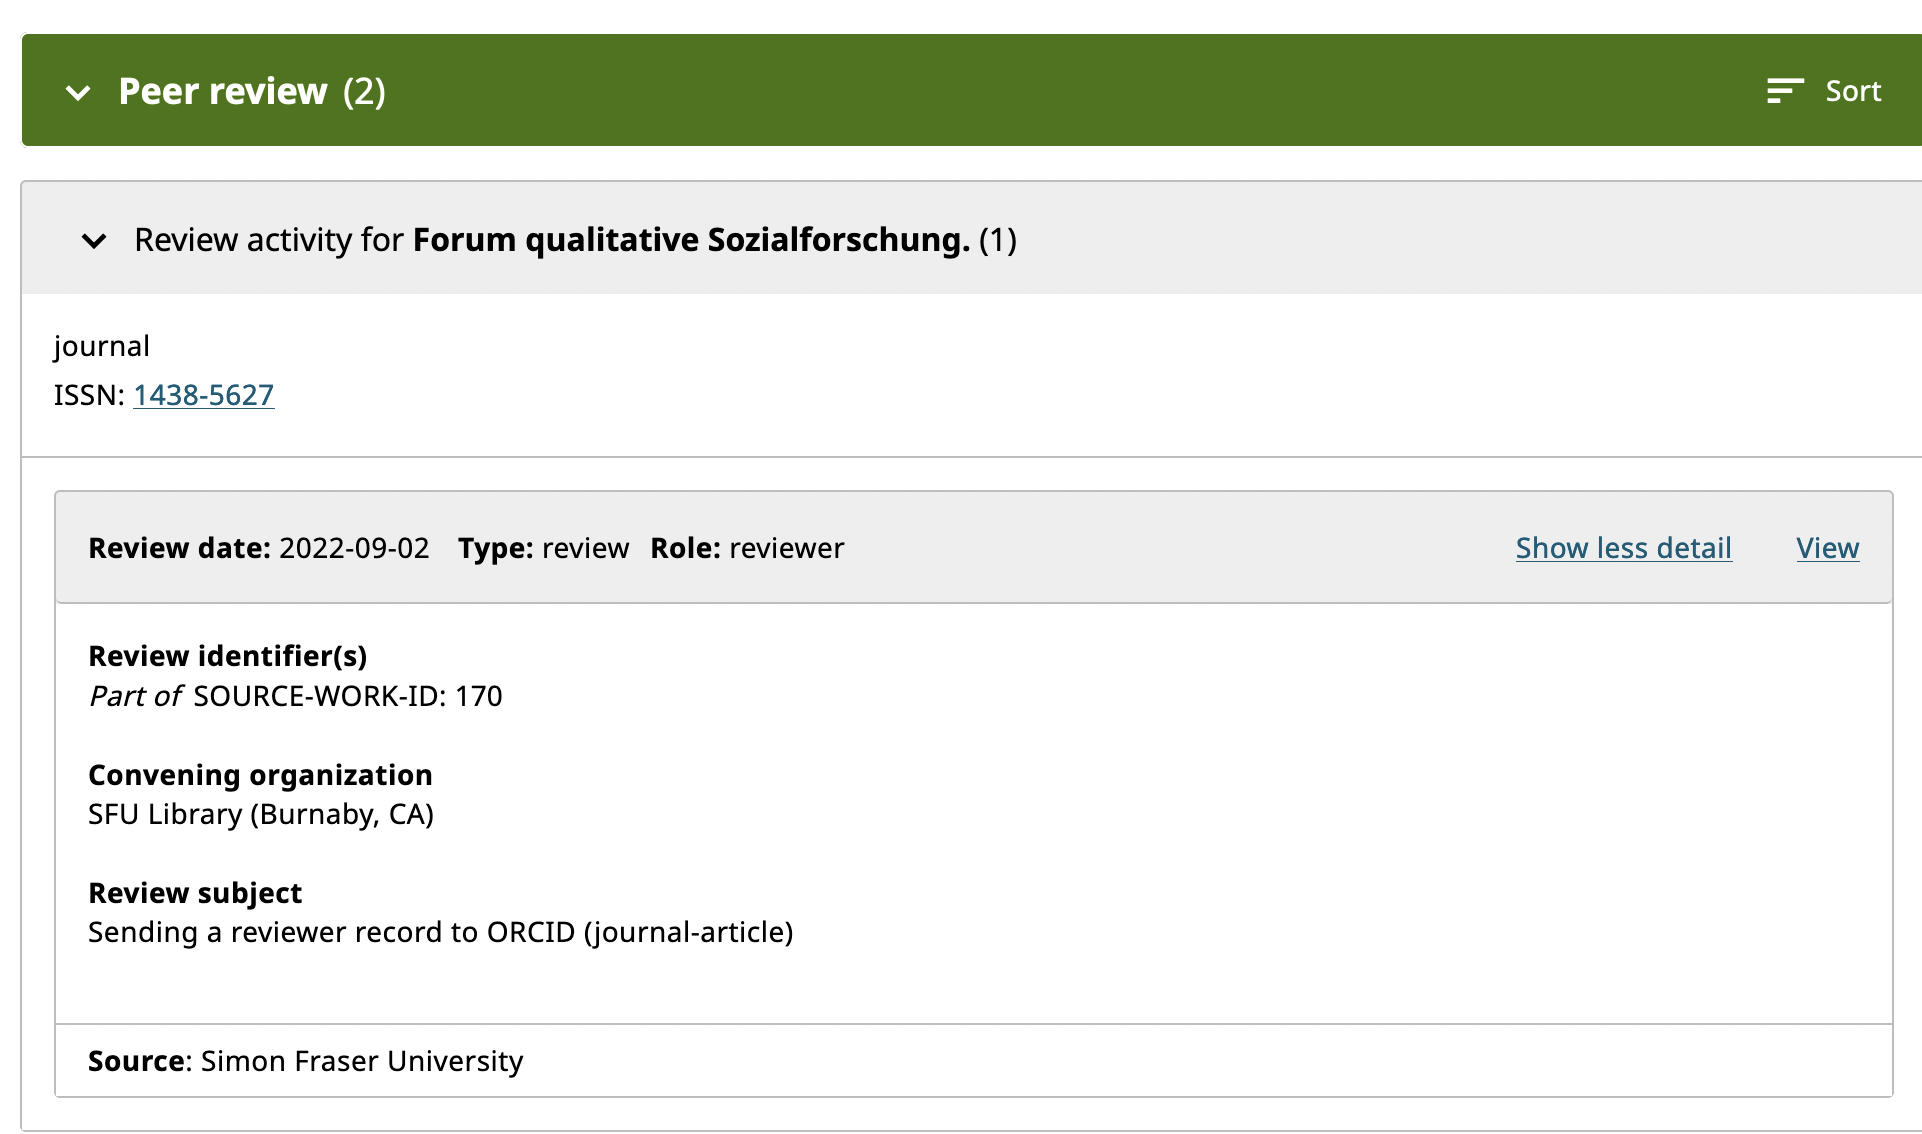 reviewer credit appearing in ORCID.